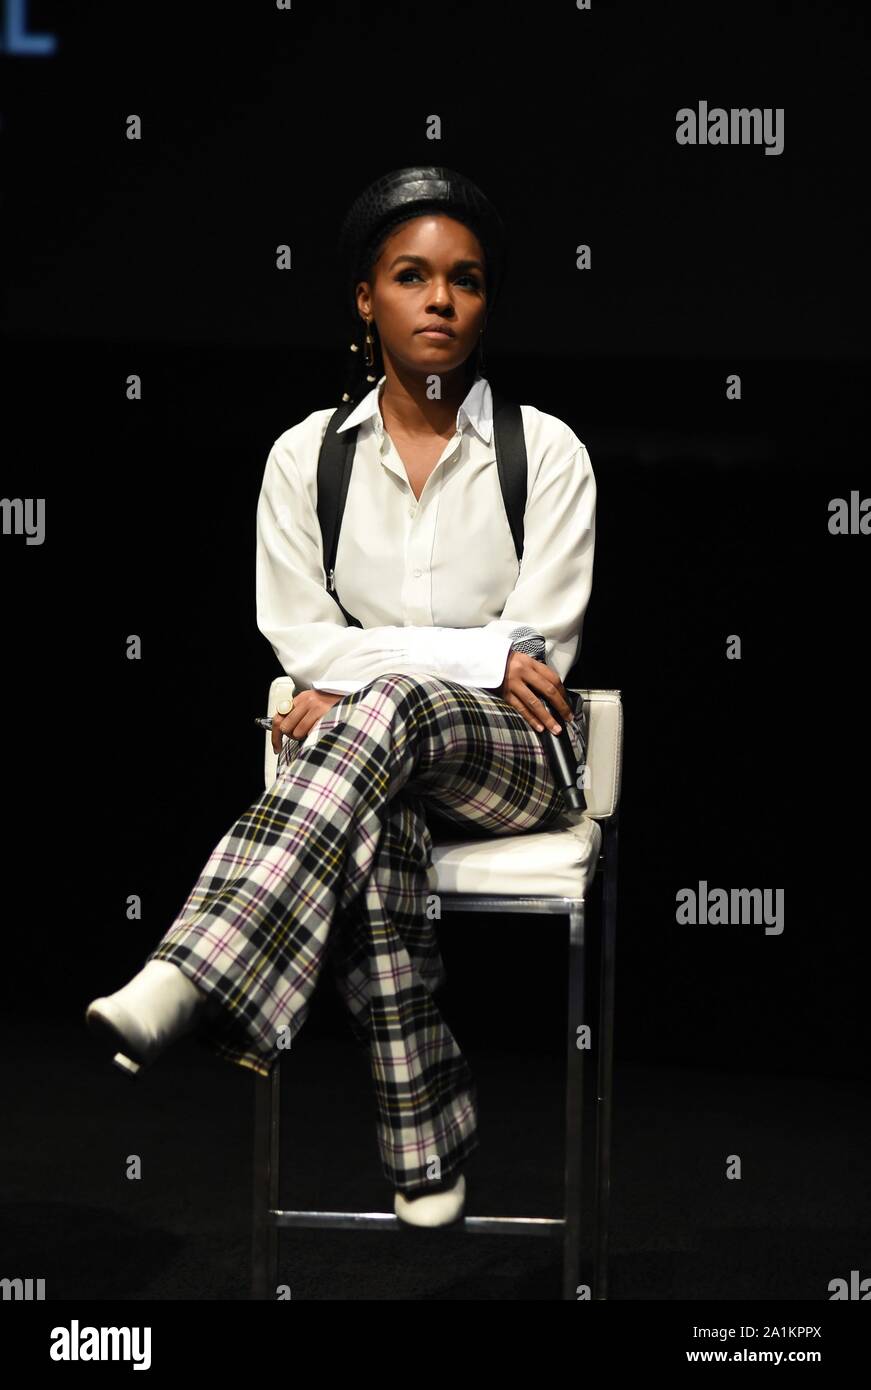 Janelle Monae at the press conference for Global Citizen Goal Live: The Possible Dream 2020 Campaign Launch, St. Ann's Warehouse, Brooklyn, NY September 26, 2019. Photo By: Kristin Callahan/Everett Collection Stock Photo